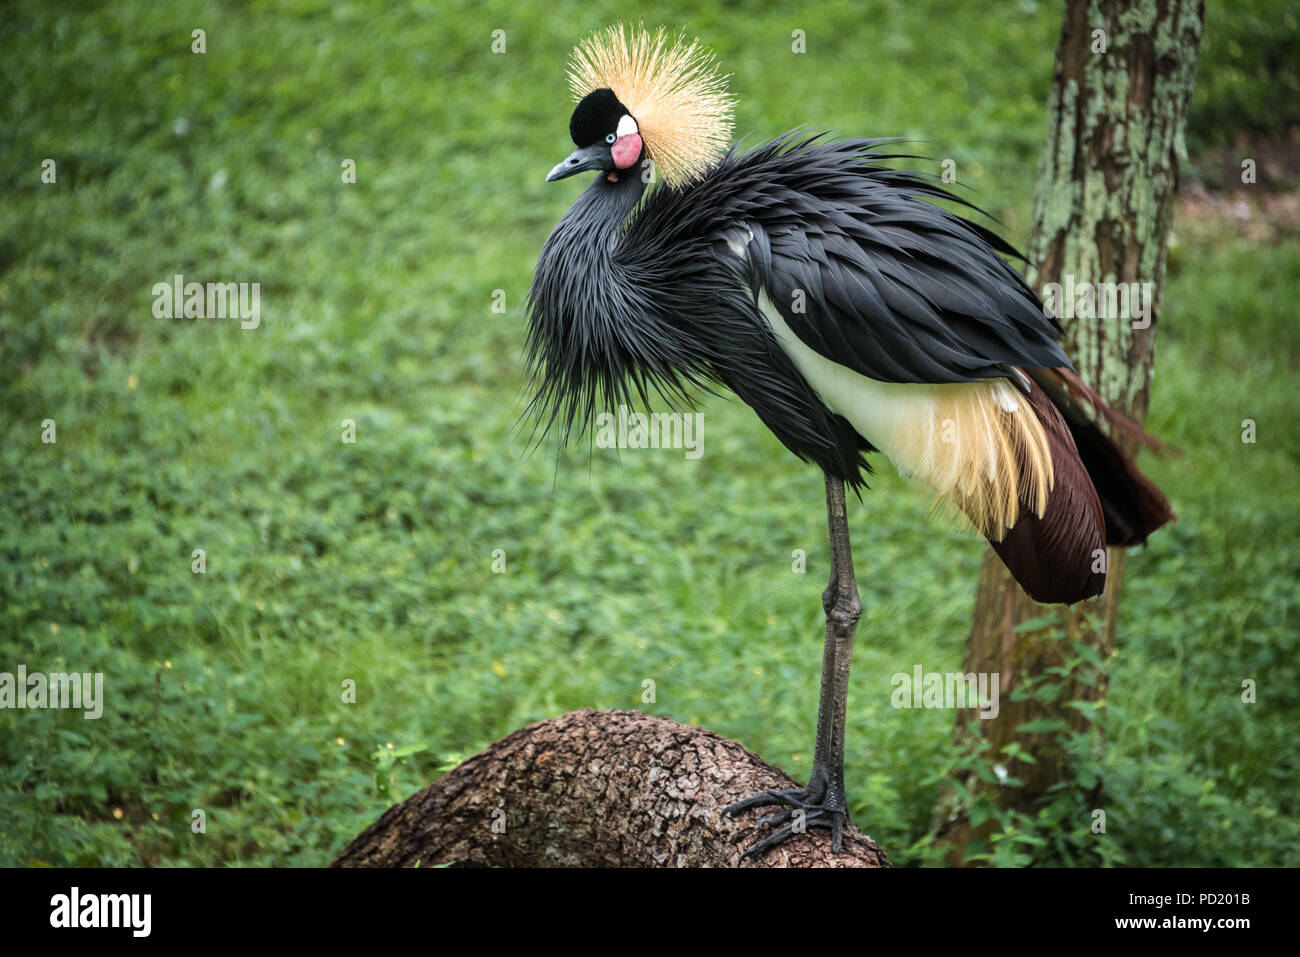 West African Crowned Crane at St. Augustine Alligator Farm Zoological Park in St. Augustine, Florida. (USA) Stock Photo